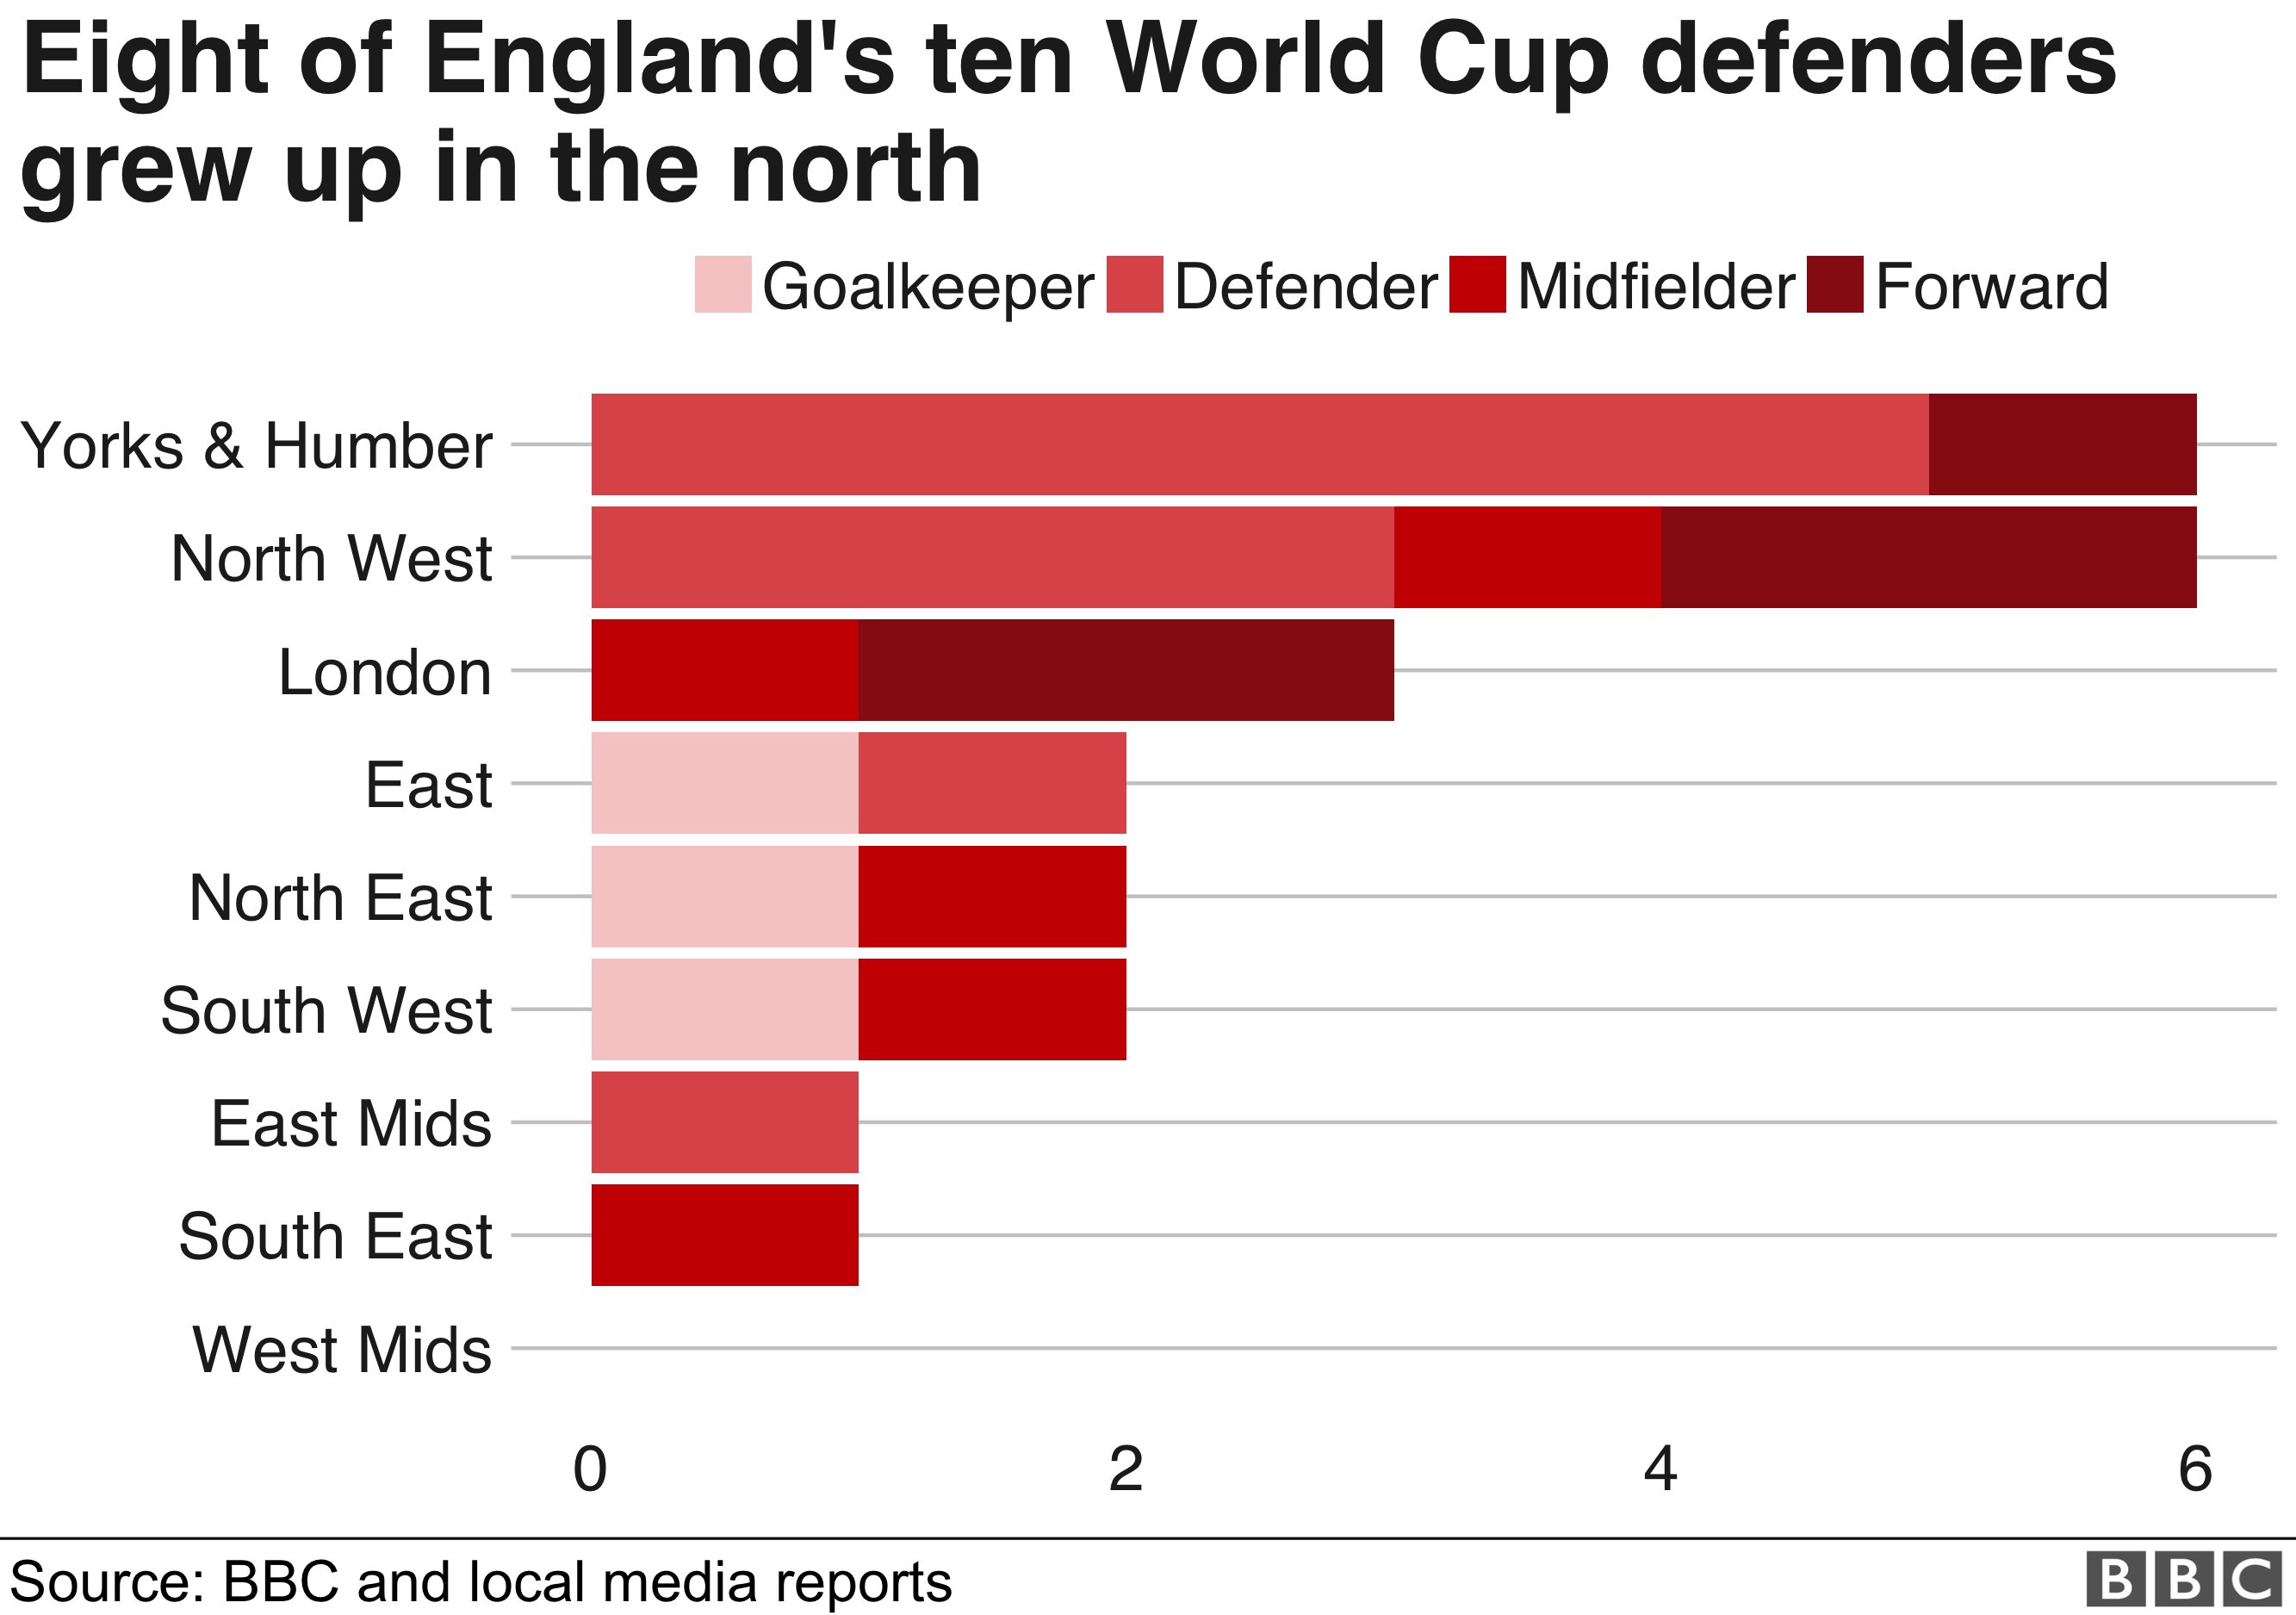 Eight of England's ten World Cup defenders grew up in the north